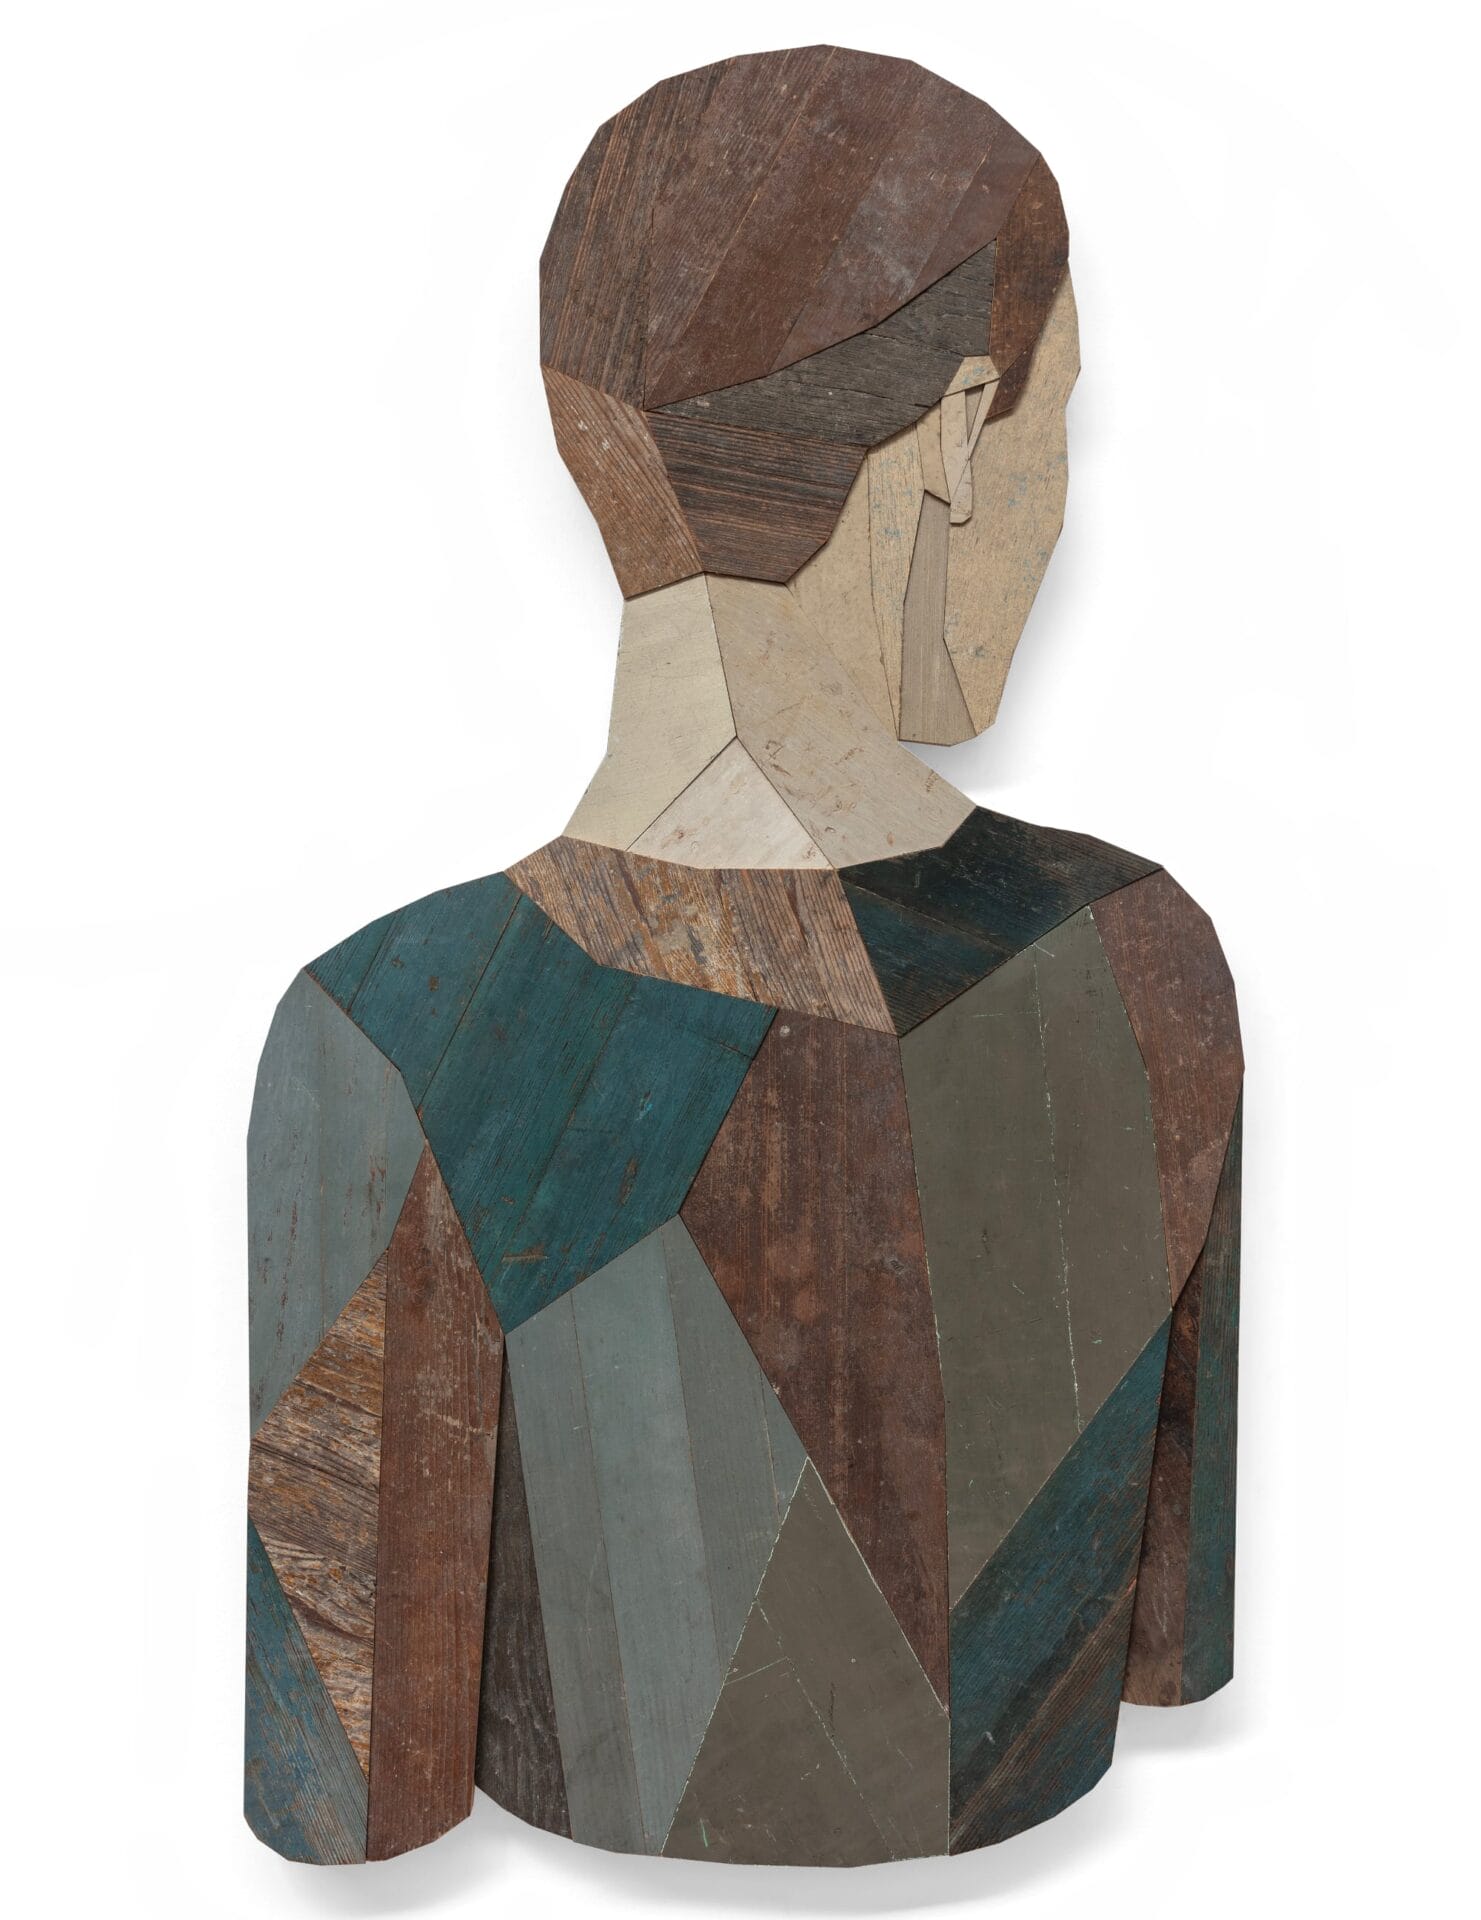 a portrait of a faceless figures made of collaged wood